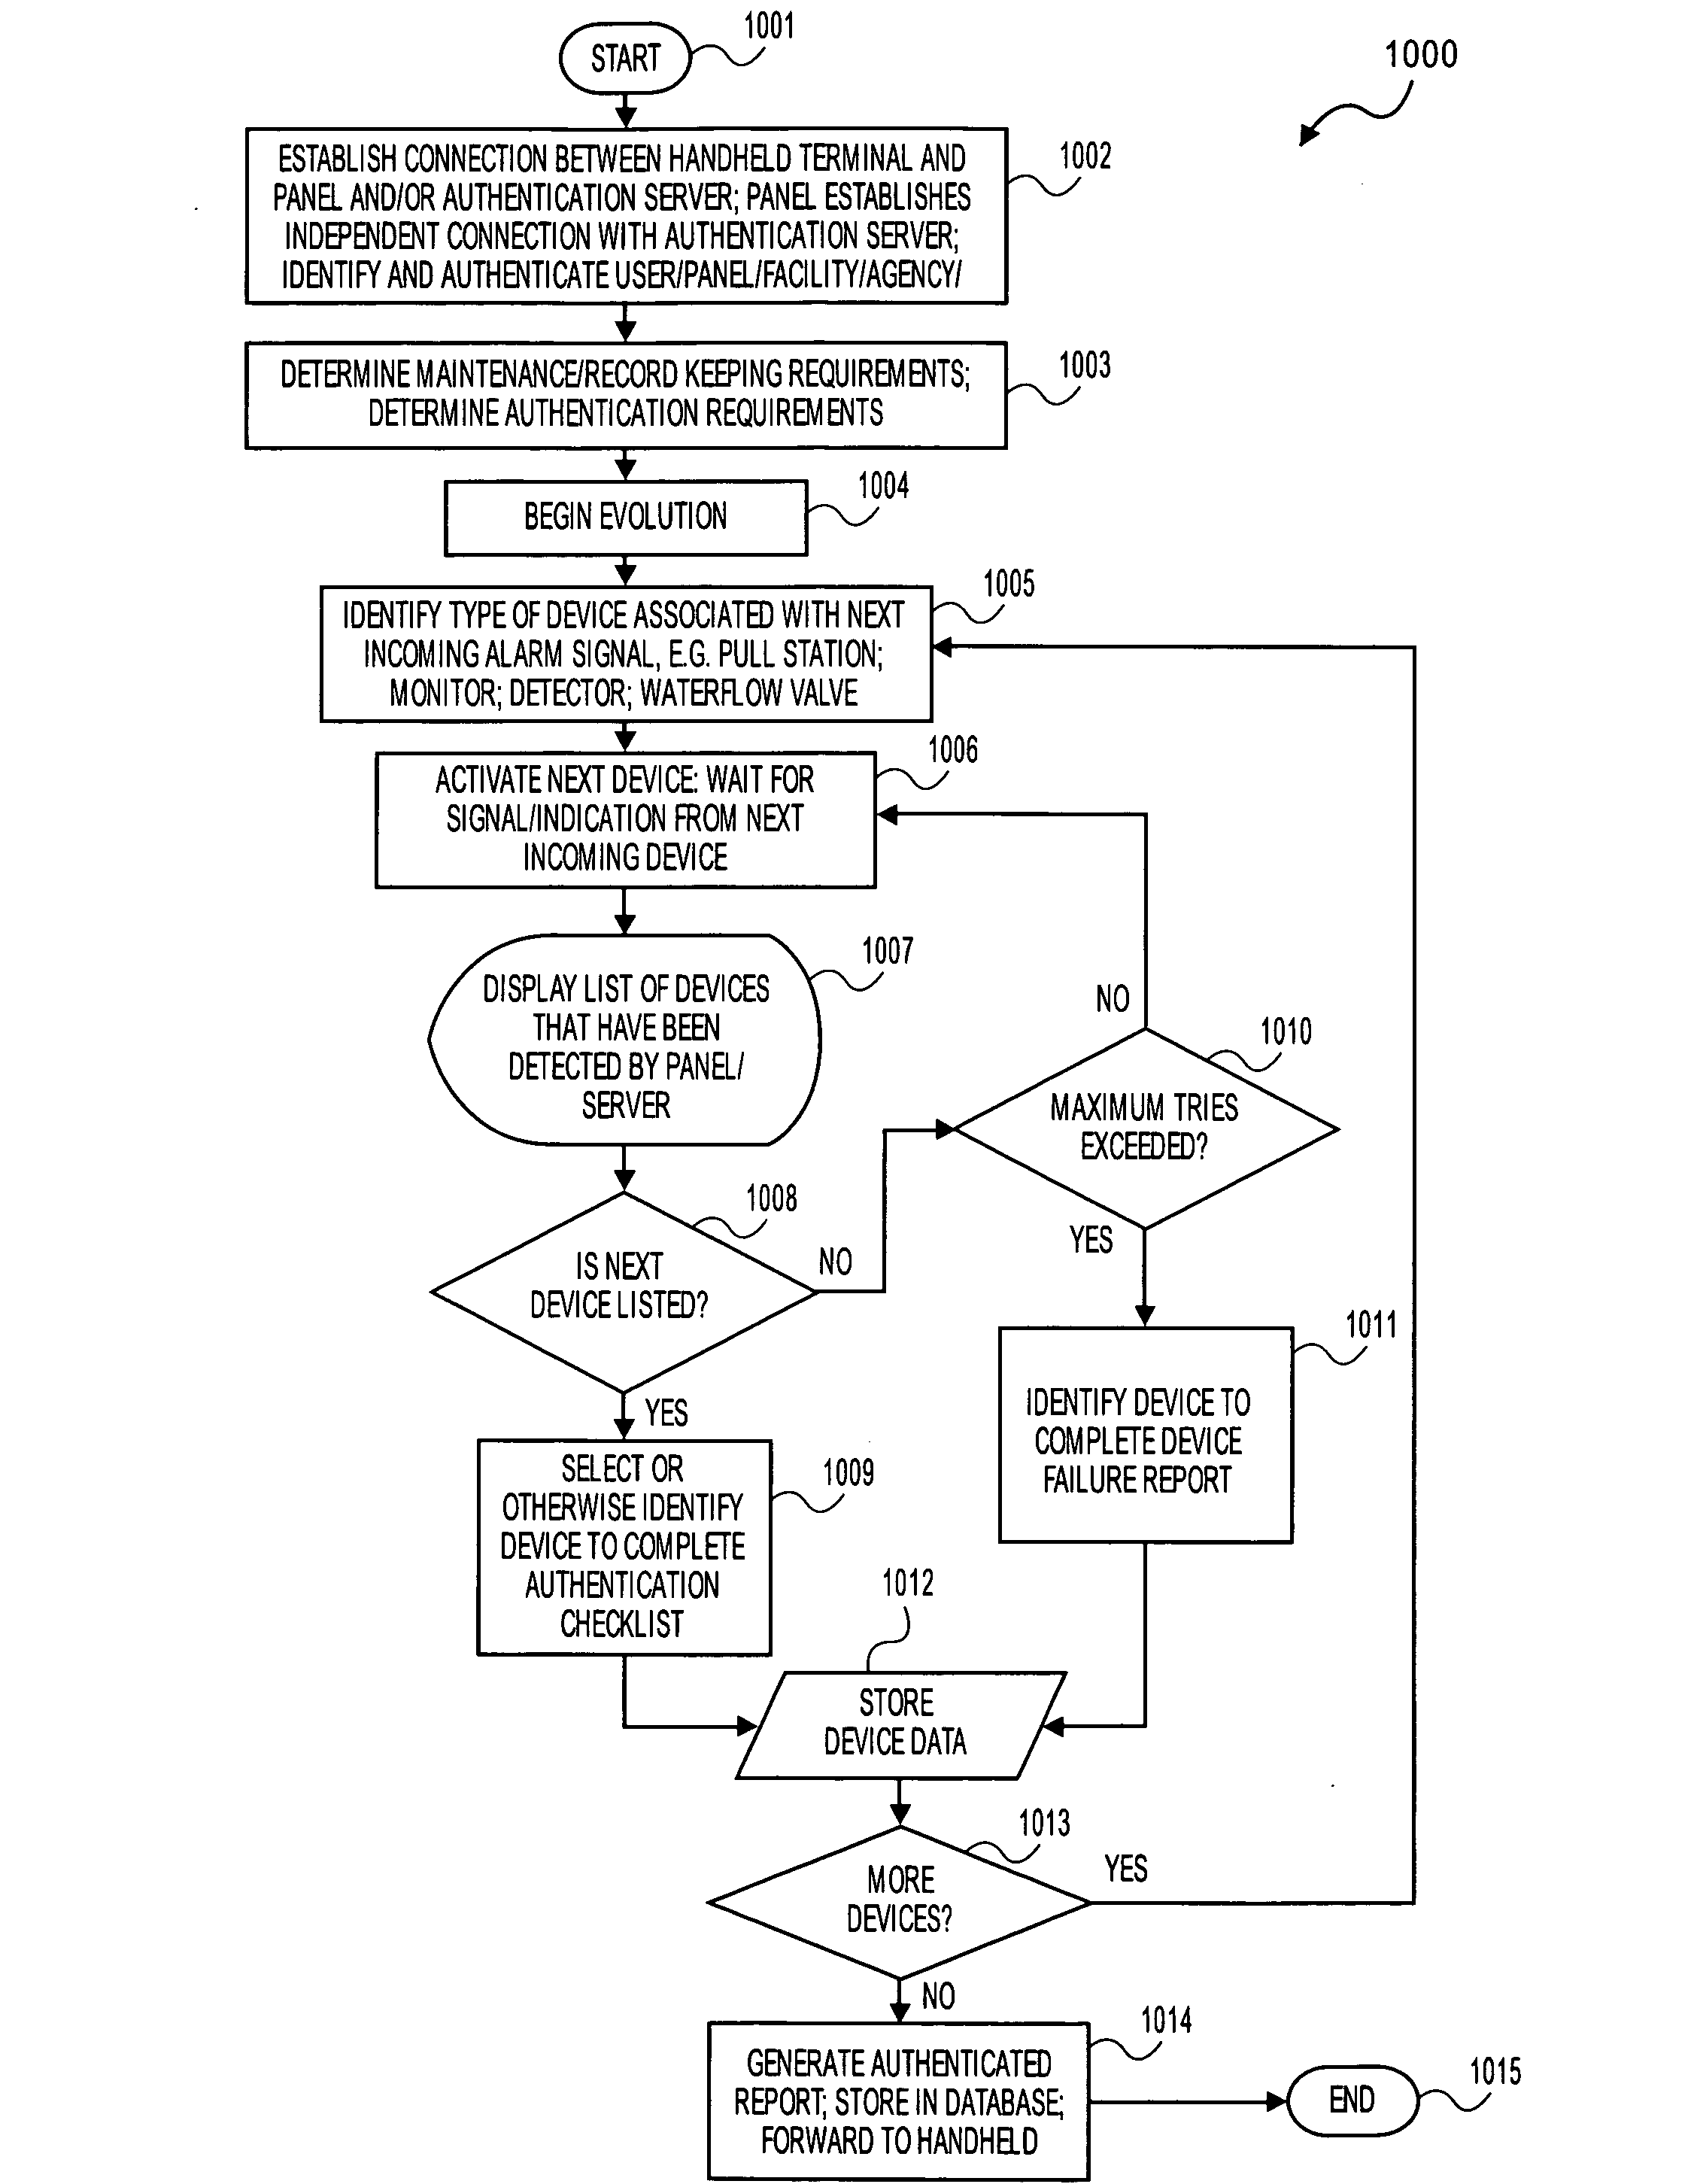 Method and apparatus for authenicated on-site testing, inspection, servicing and control of life-safety equipment and reporting of same using a remote accessory